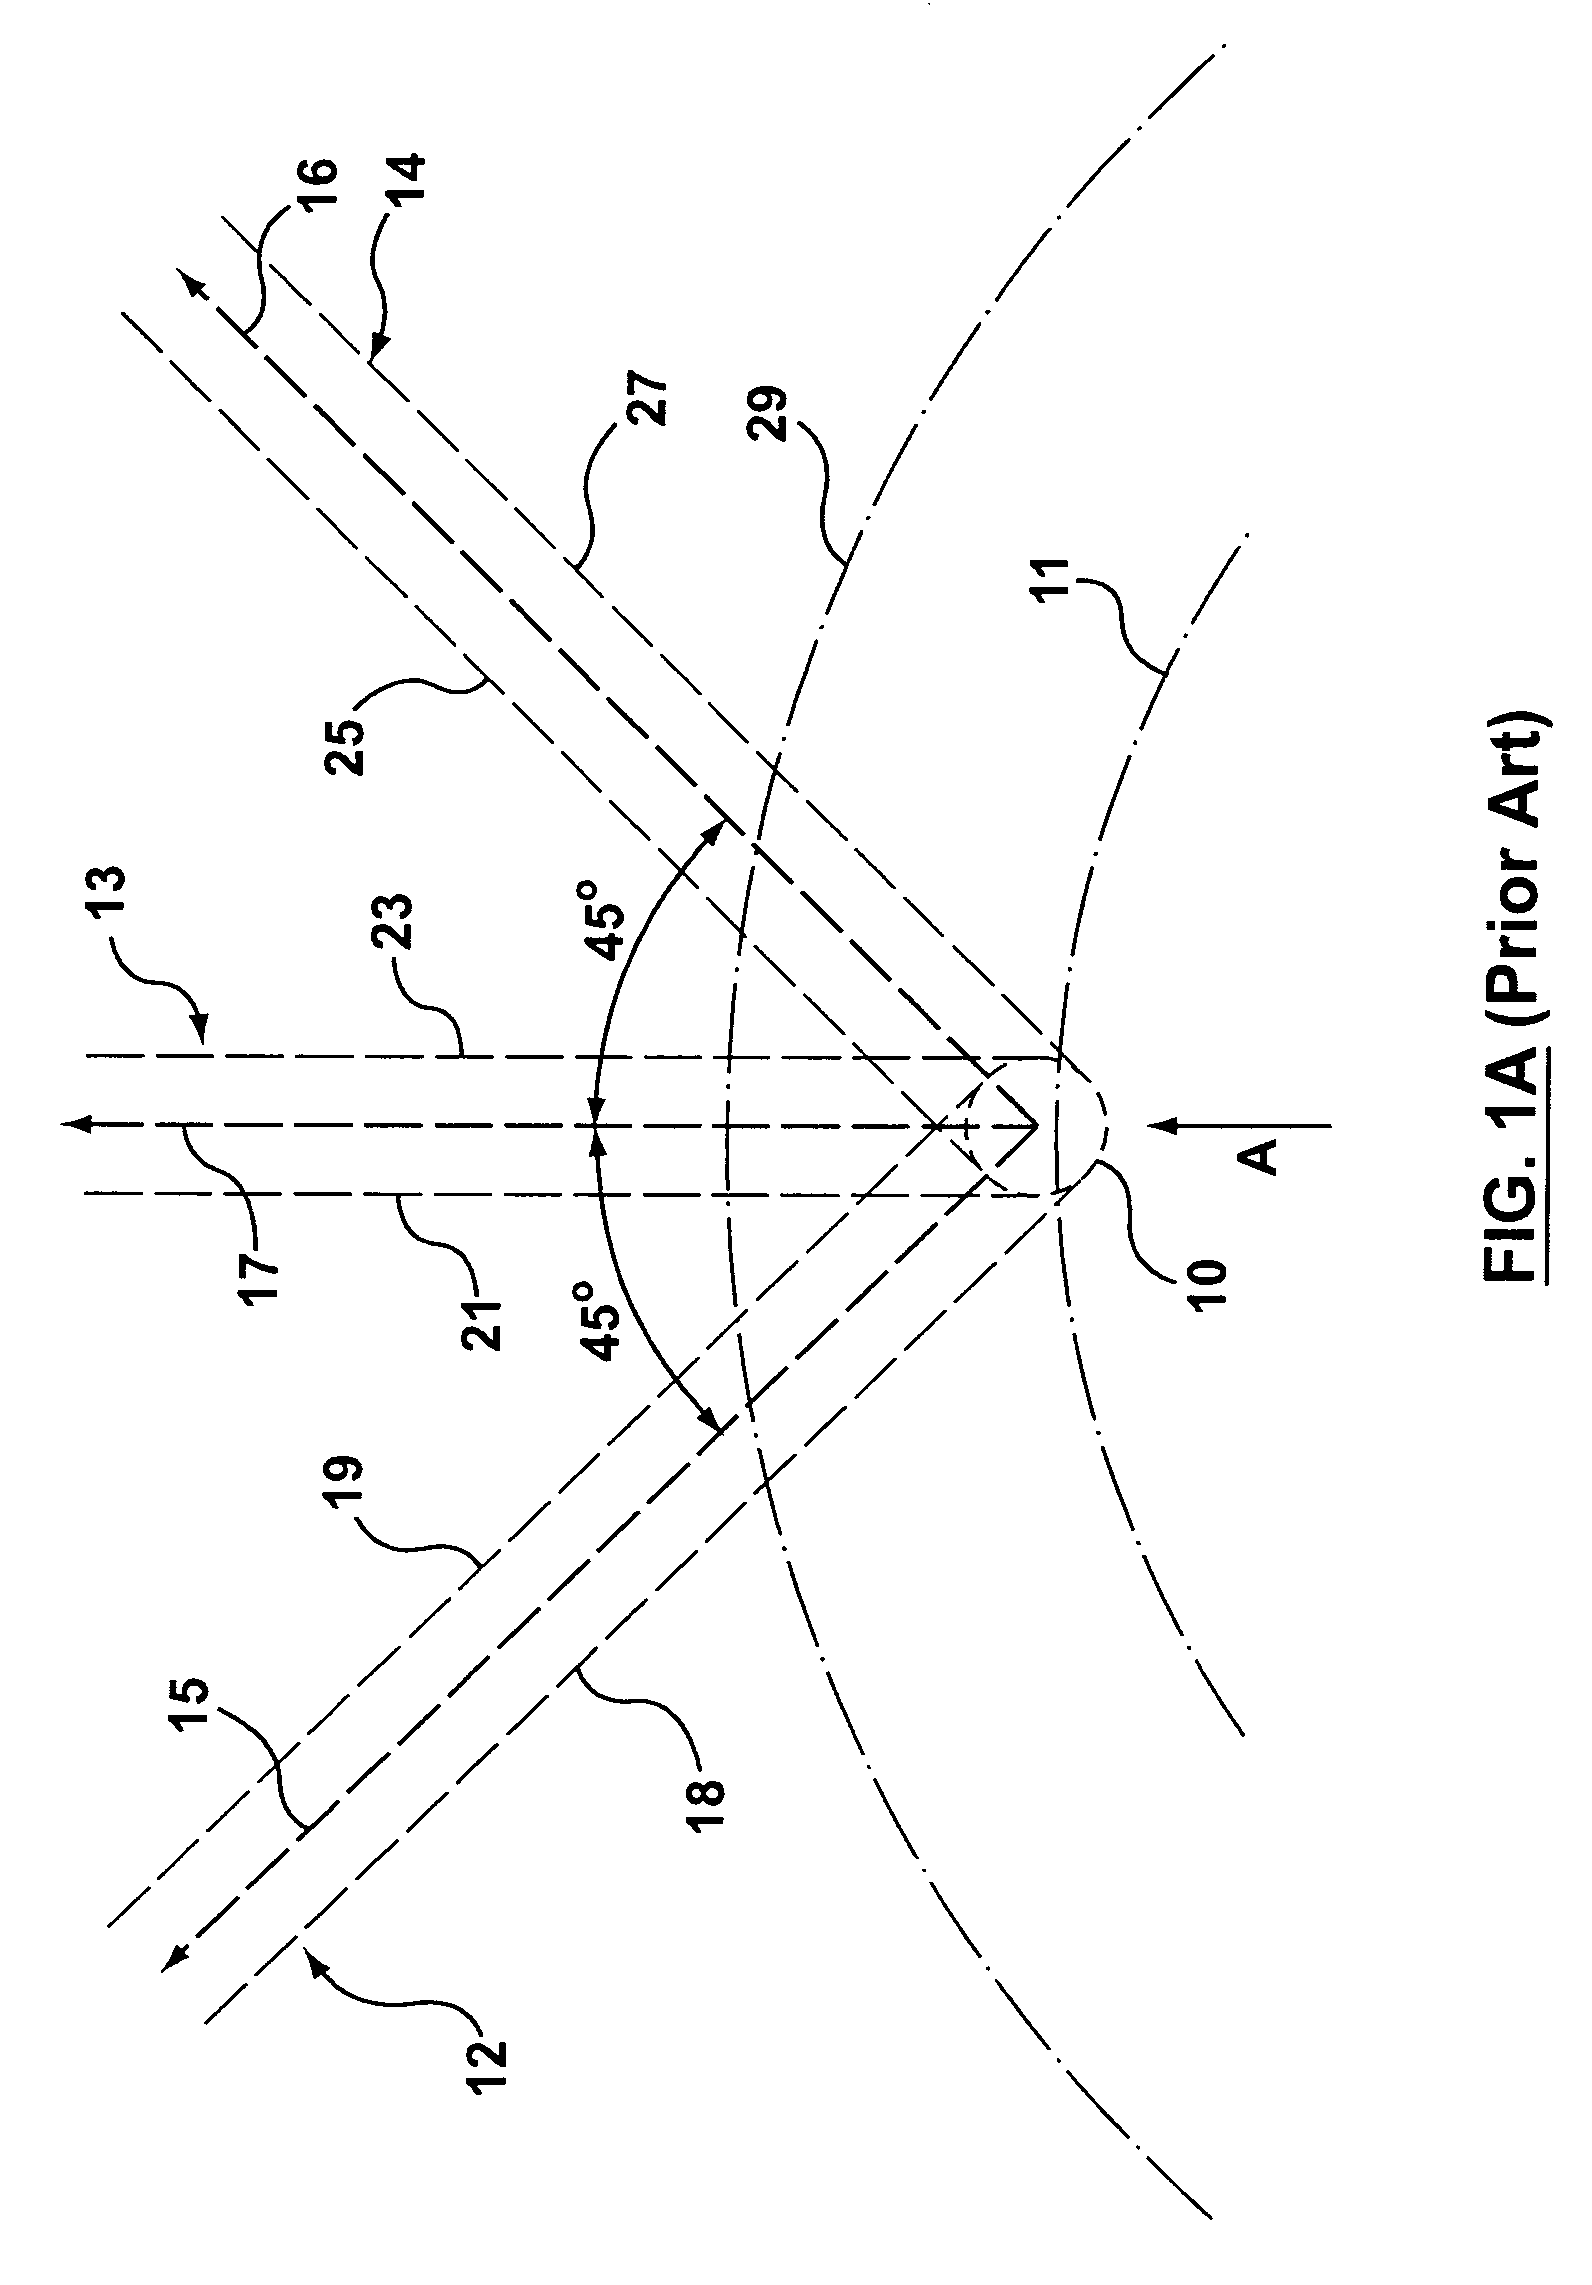 System and method for removing streams of distorted high-frequency electromagnetic radiation